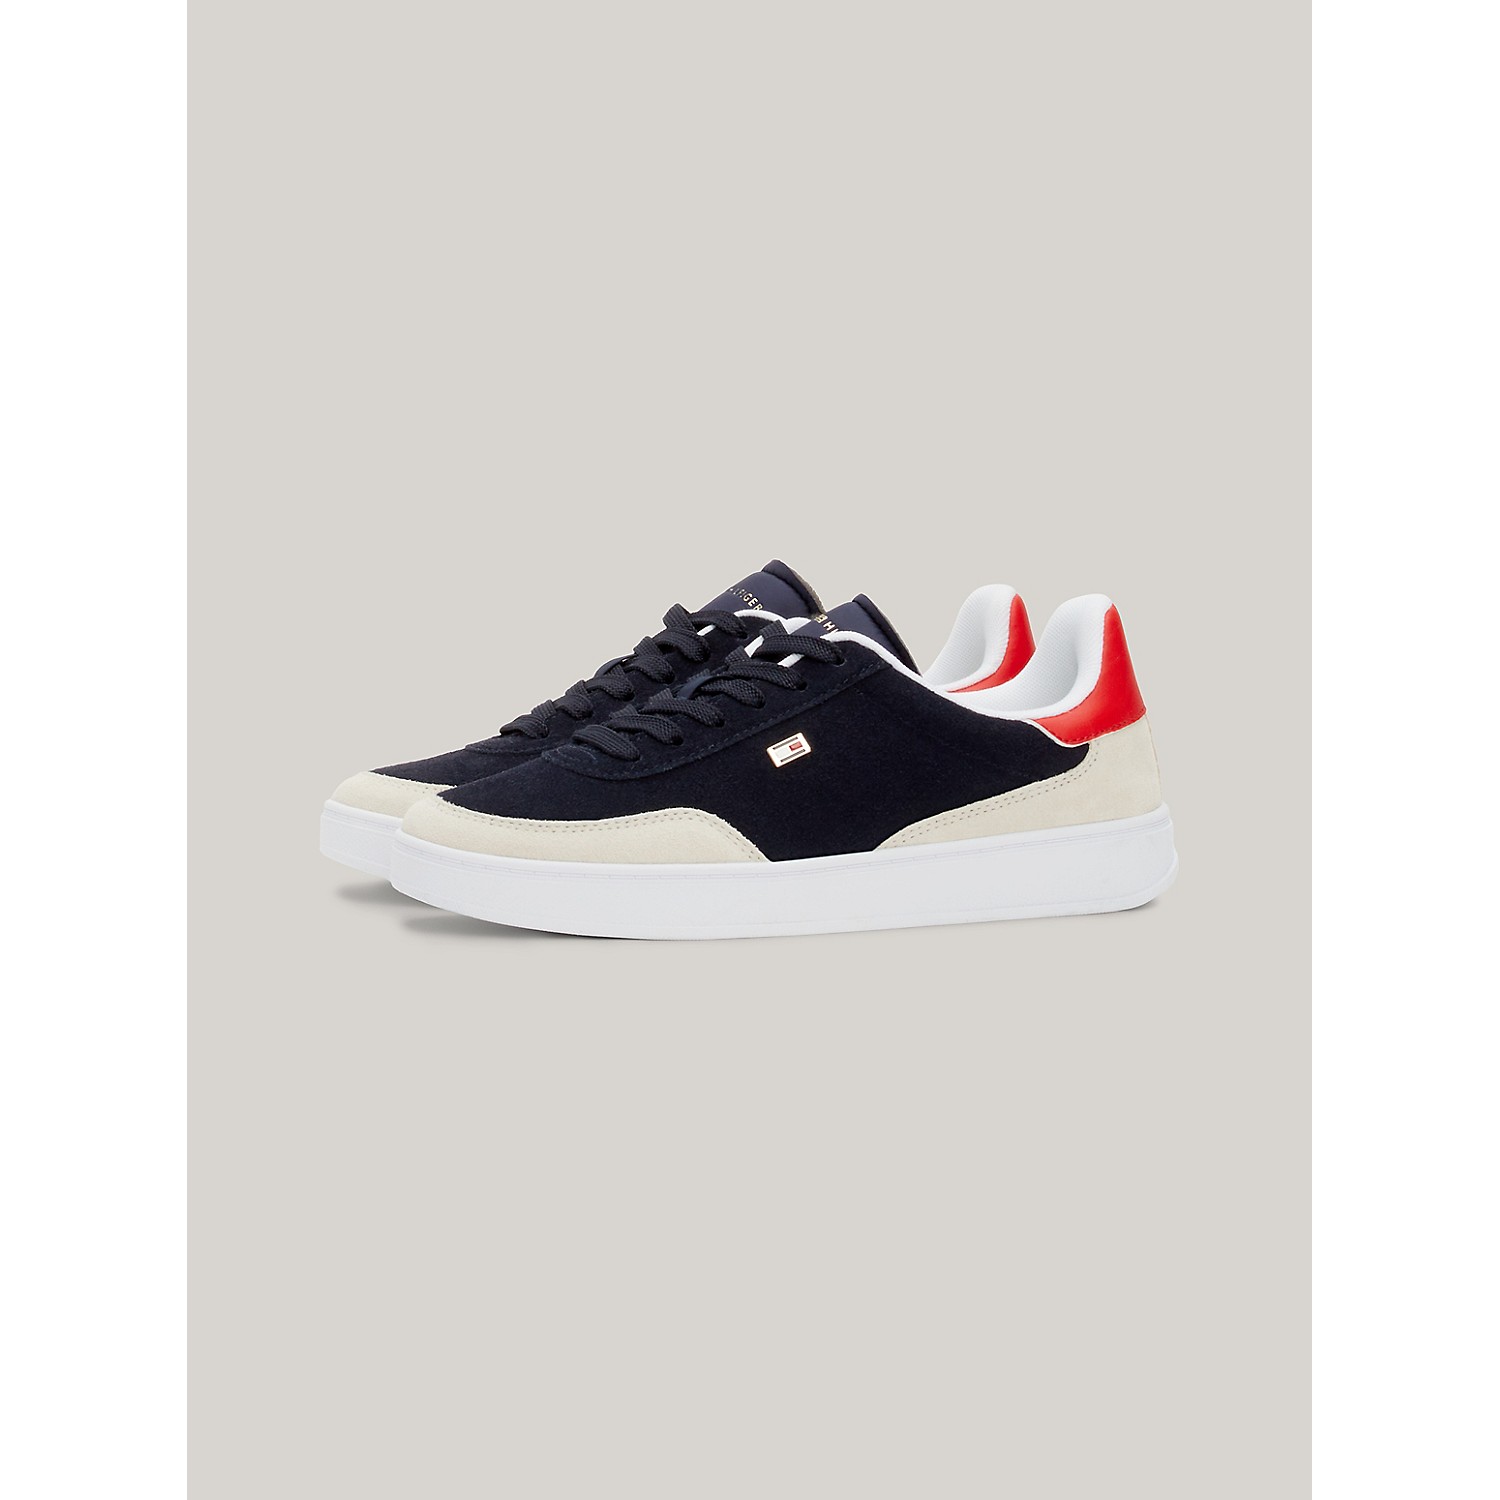 TOMMY HILFIGER Suede Cupsole Sneaker